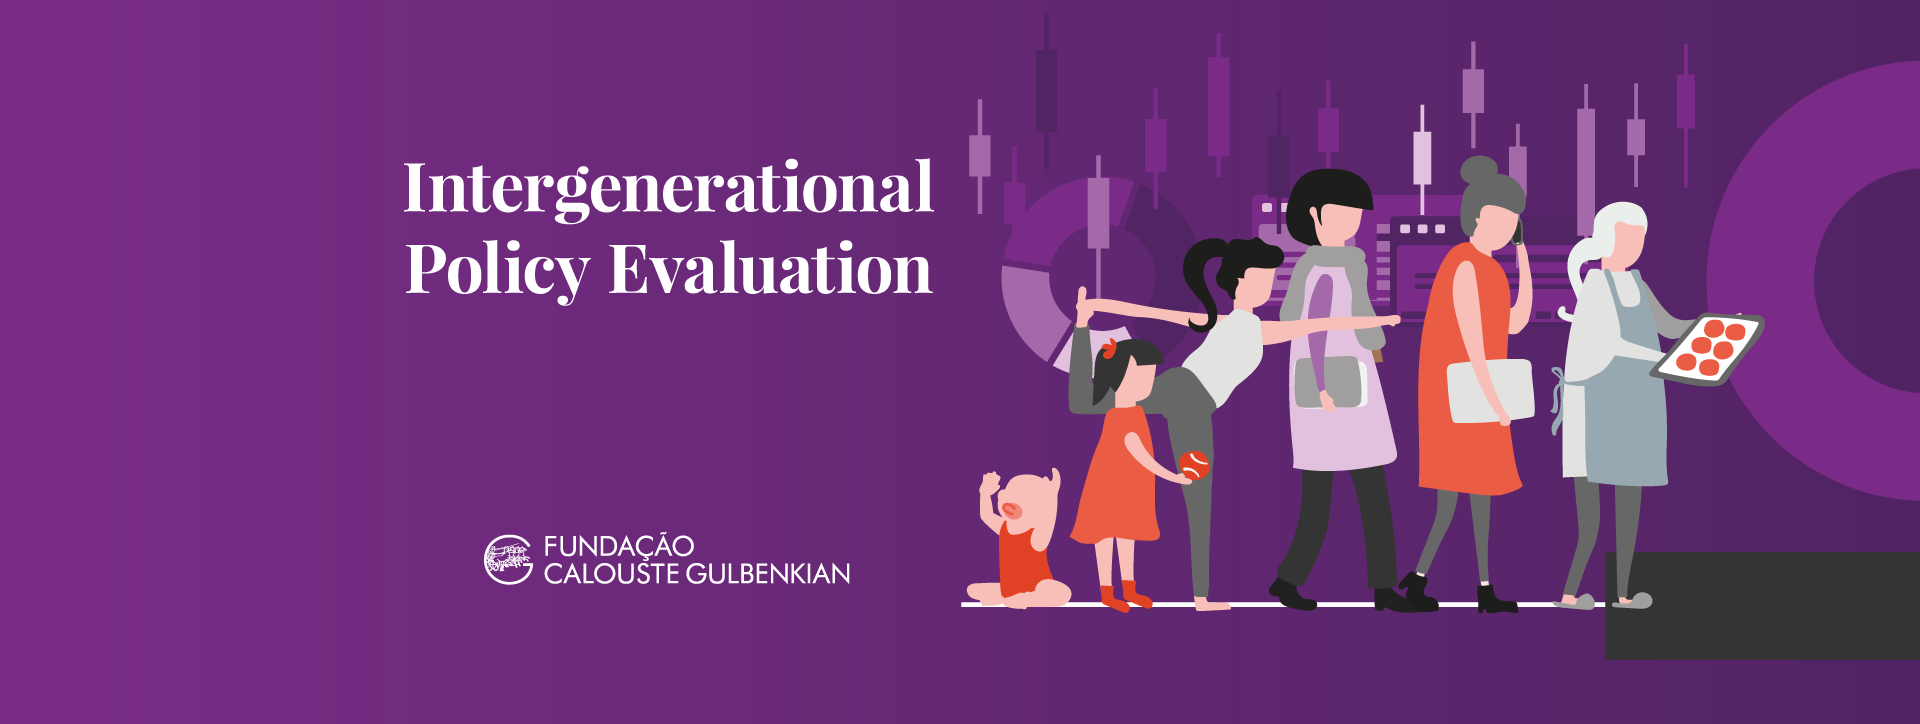 Intergenerational Policy Evaluation